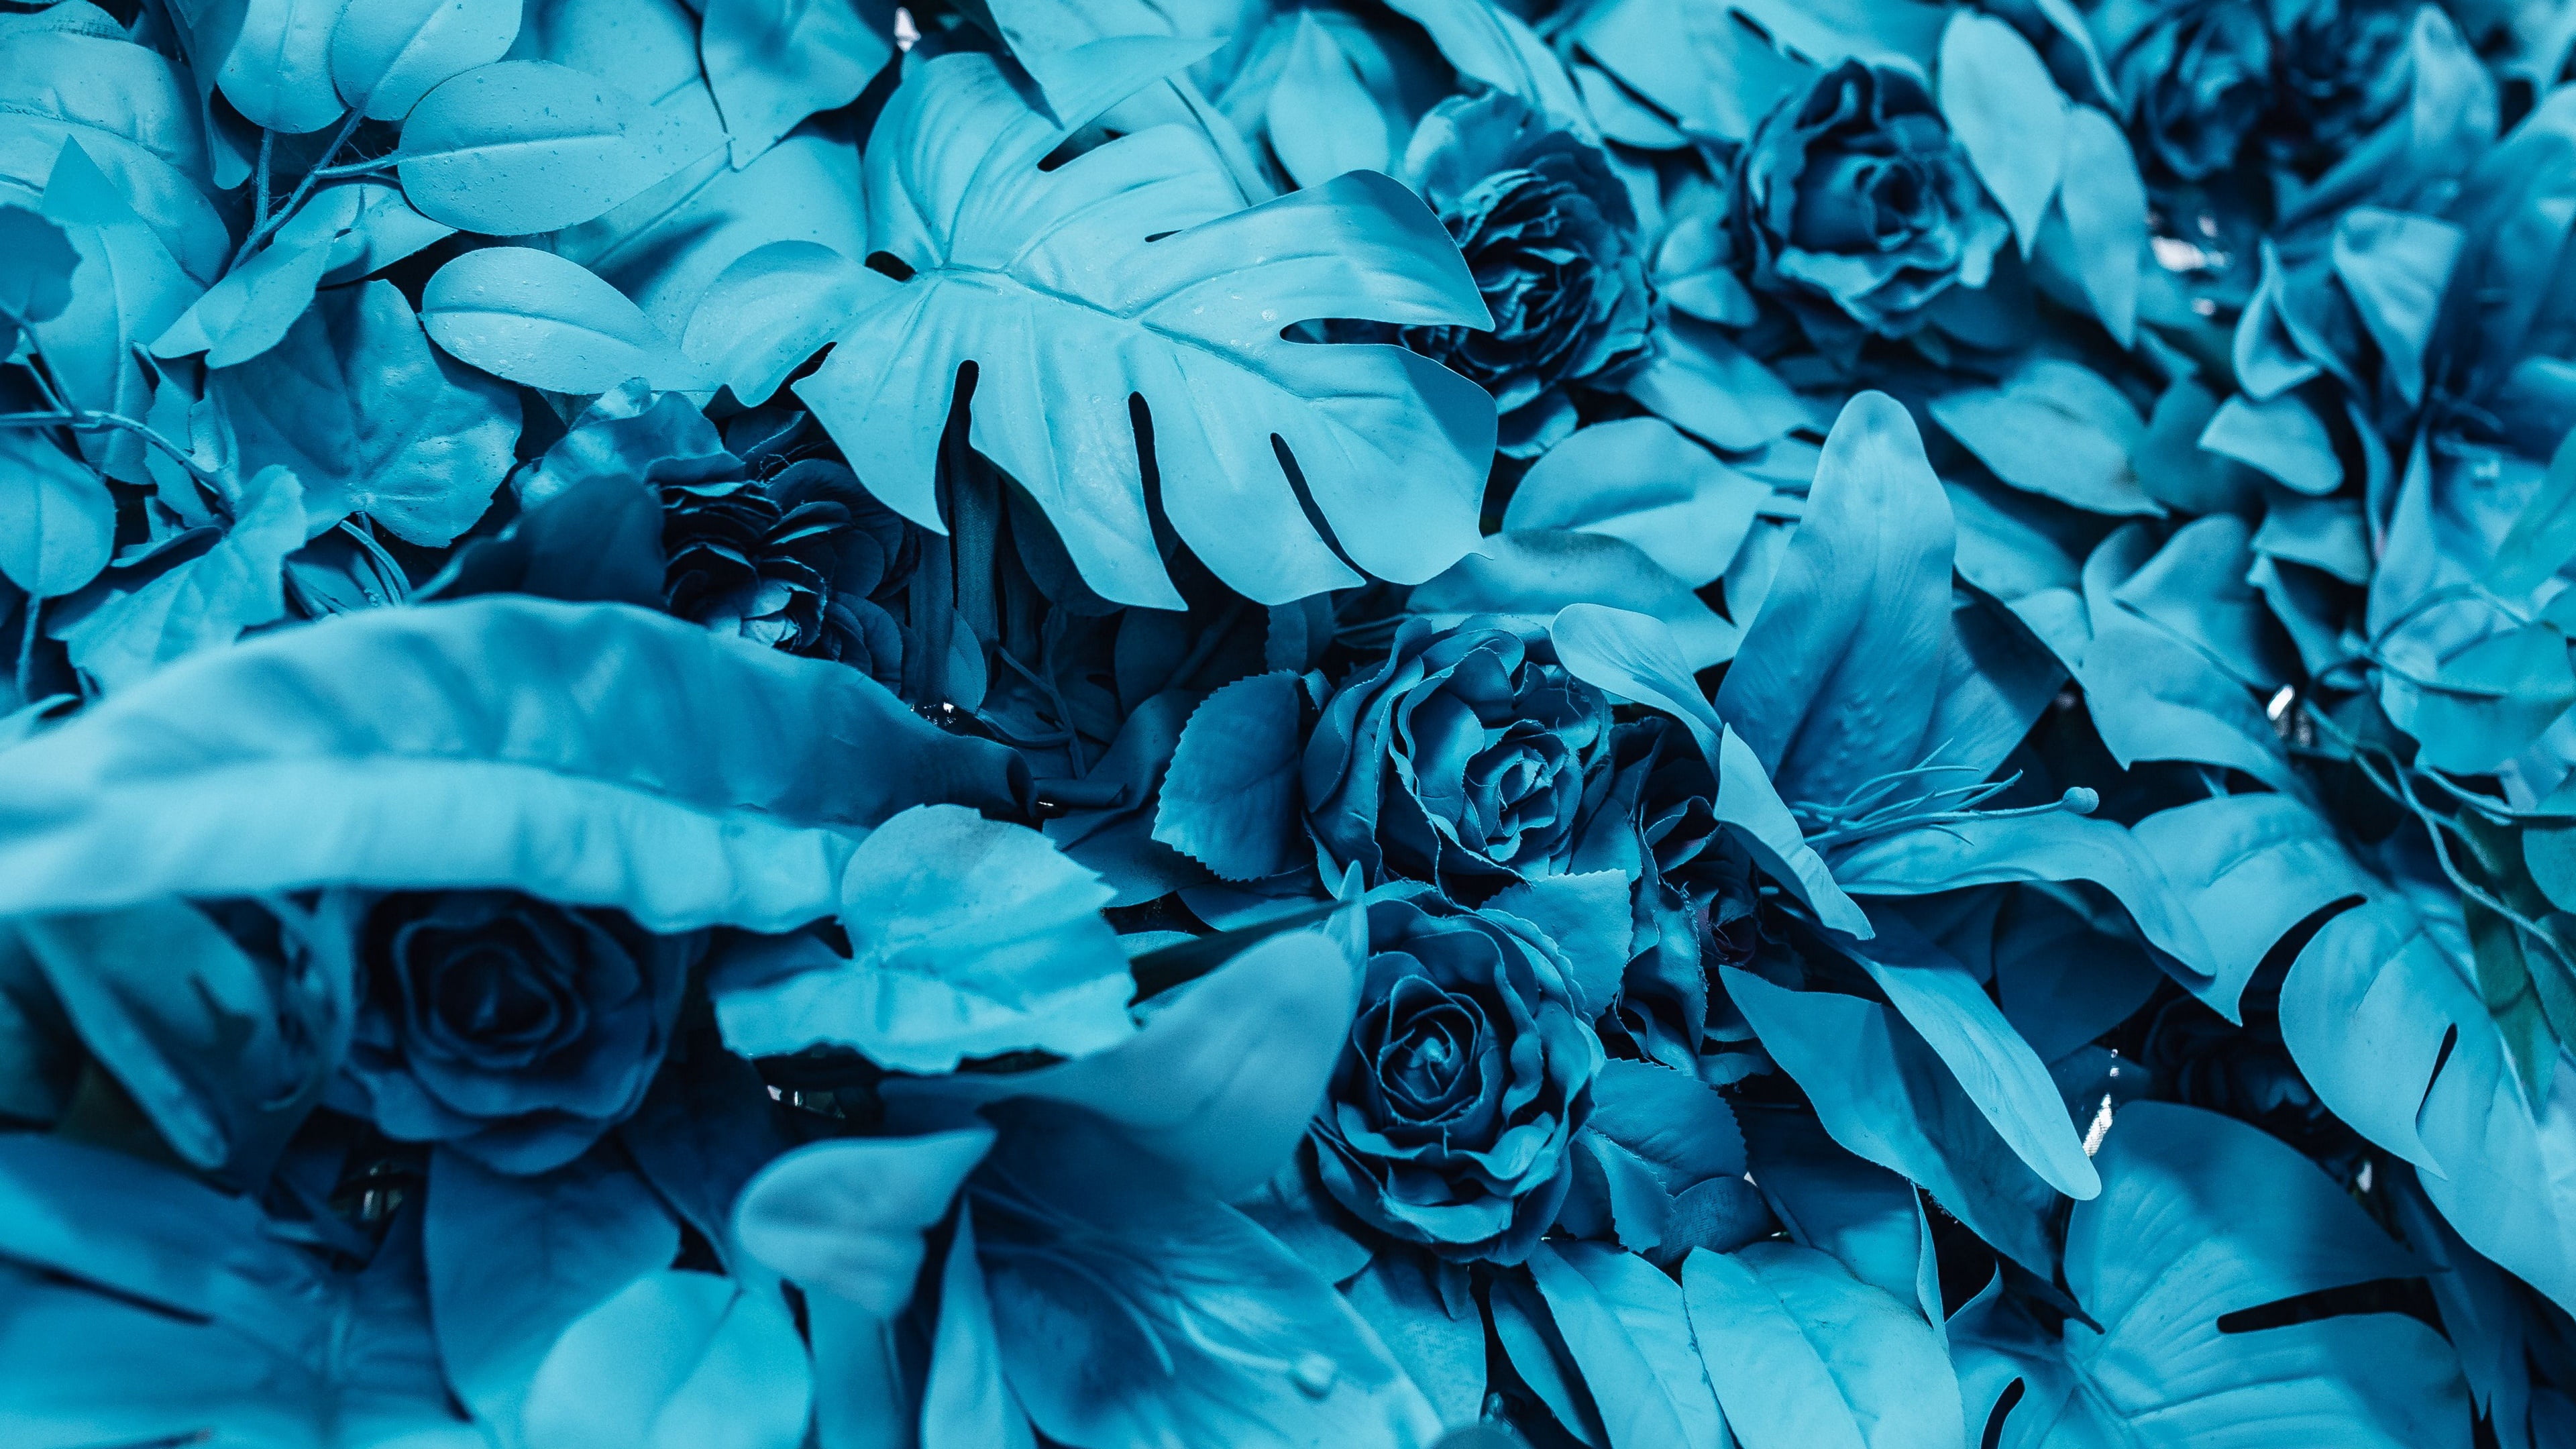 blue flowers, roses, turquoise, blue rose, full frame, close-up